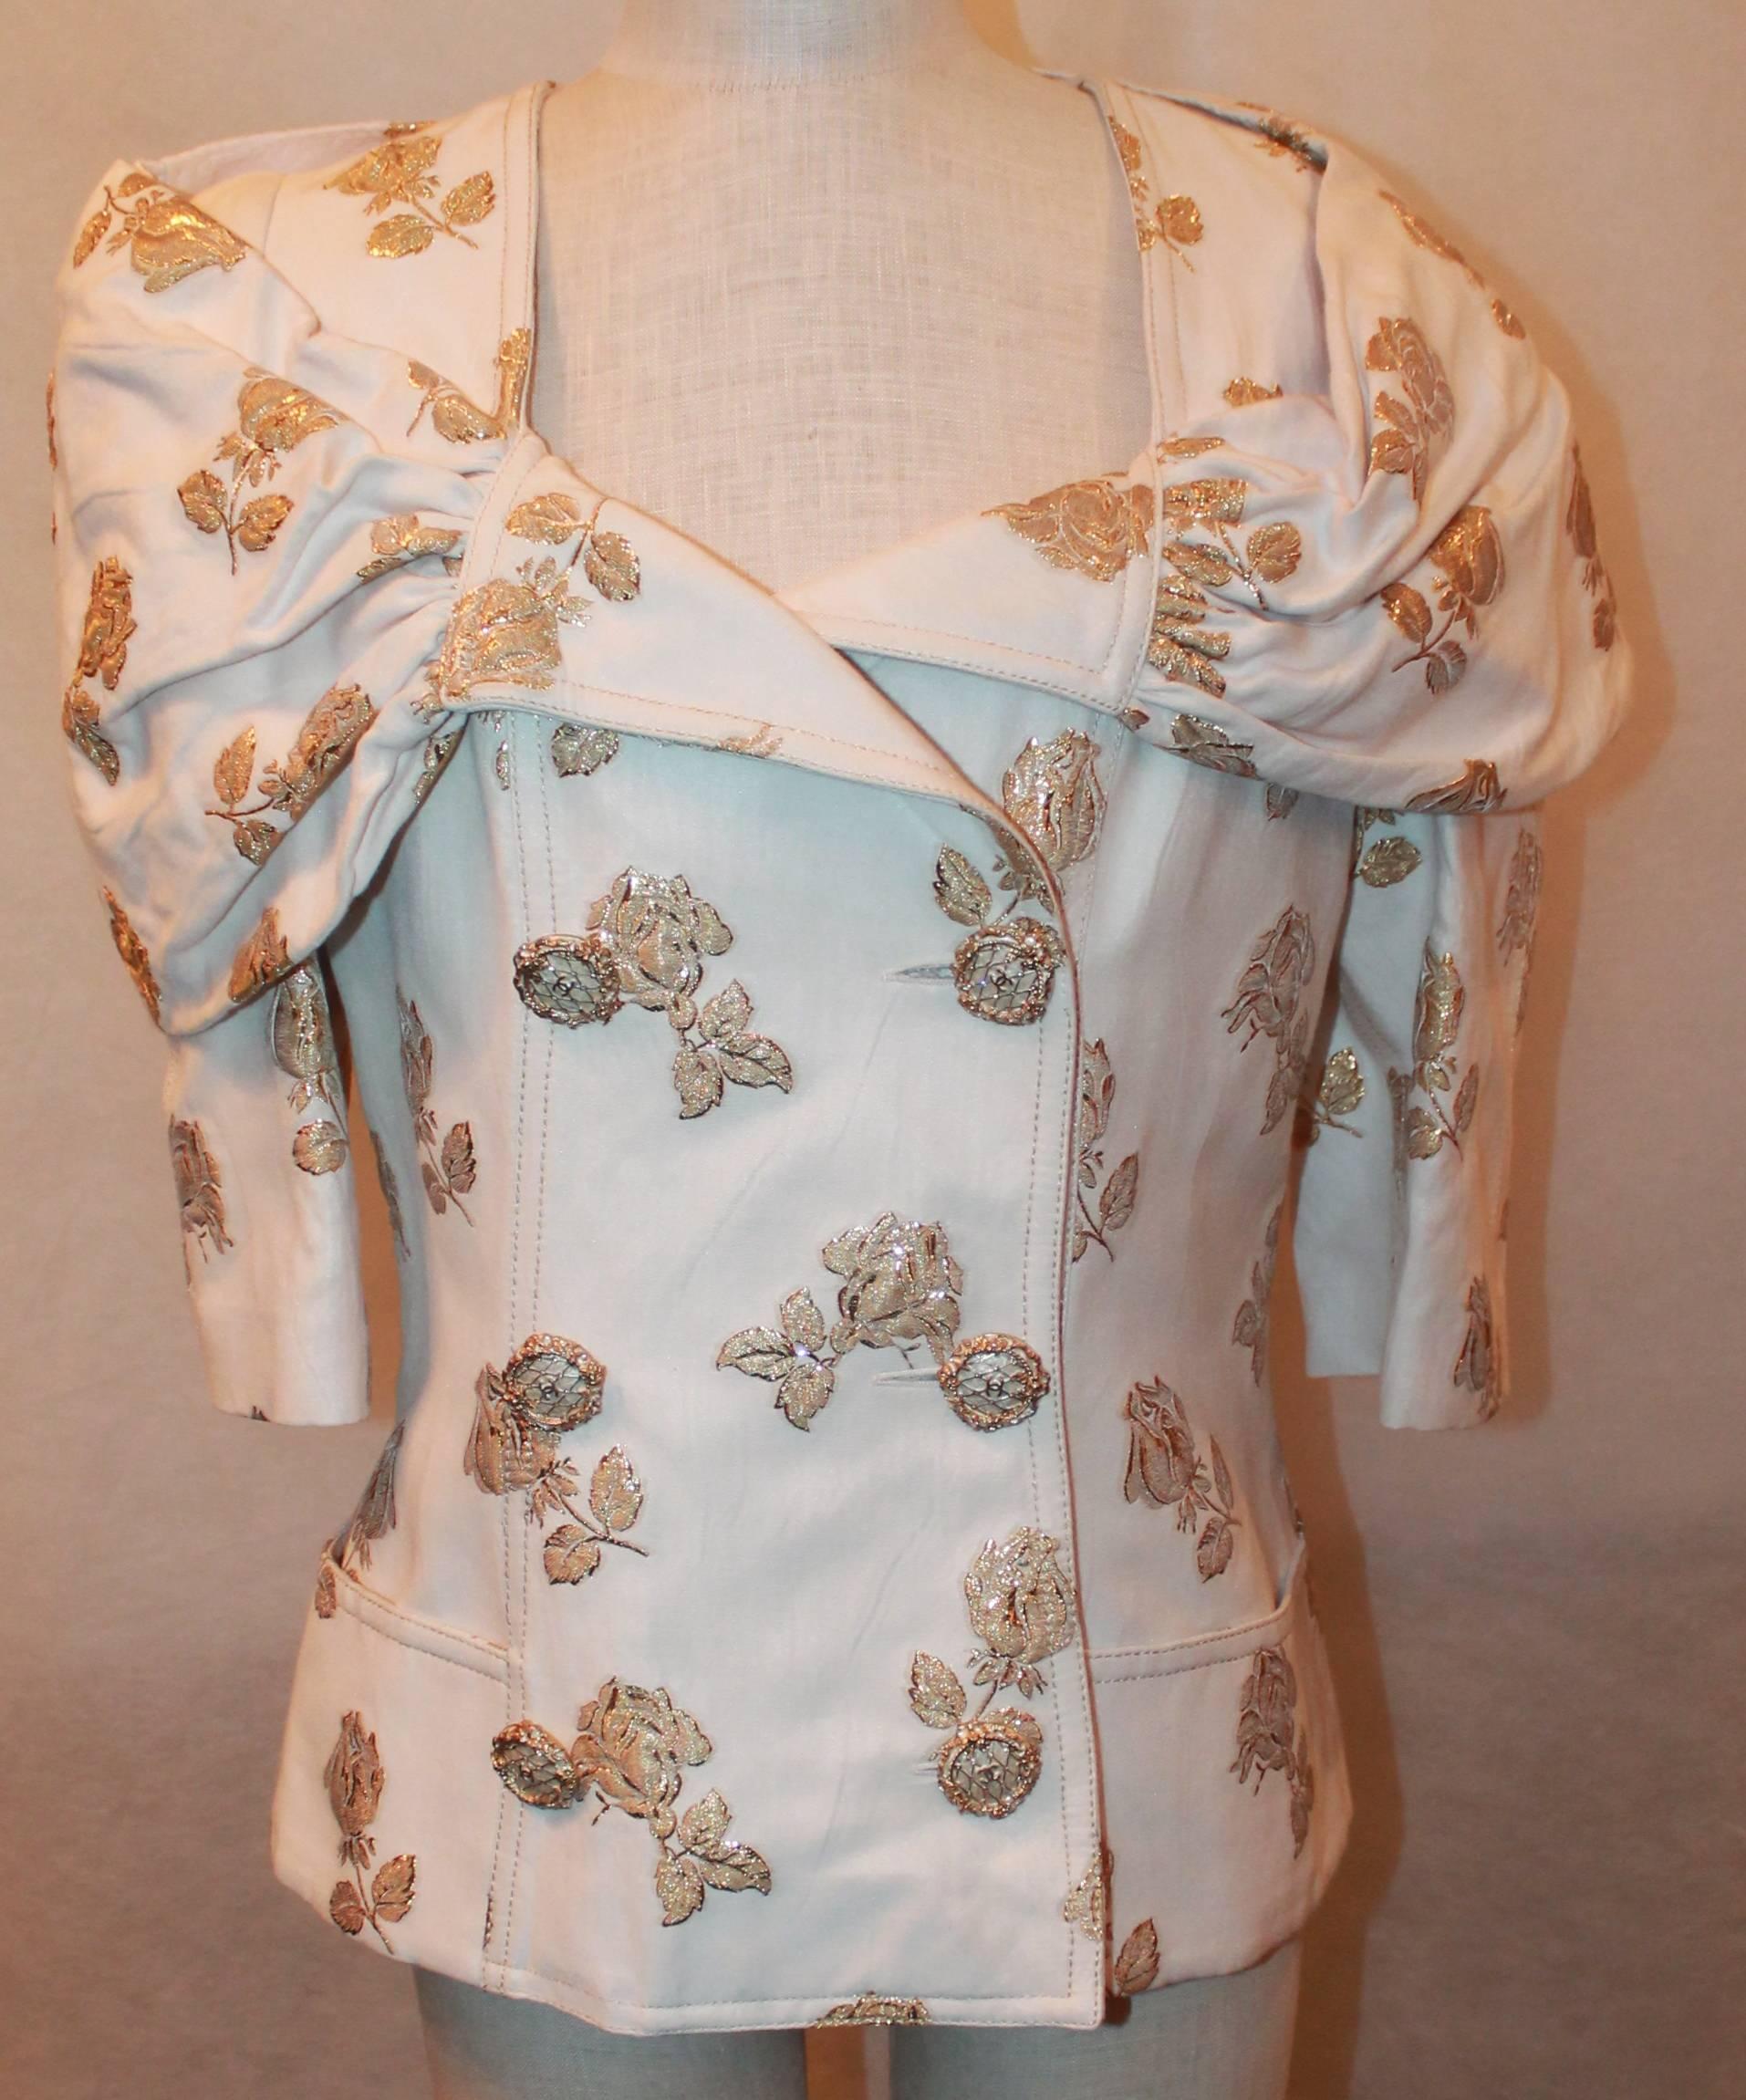 Chanel 3/4 Sleeve Ruched Portrait Collar Jacket with Floral Print - 44
This Silk Brocade Chanel Jacket is NWT retail $8,735. It is double breasted with two front pockets. These ornate buttons have white enamel and a gold vine design with